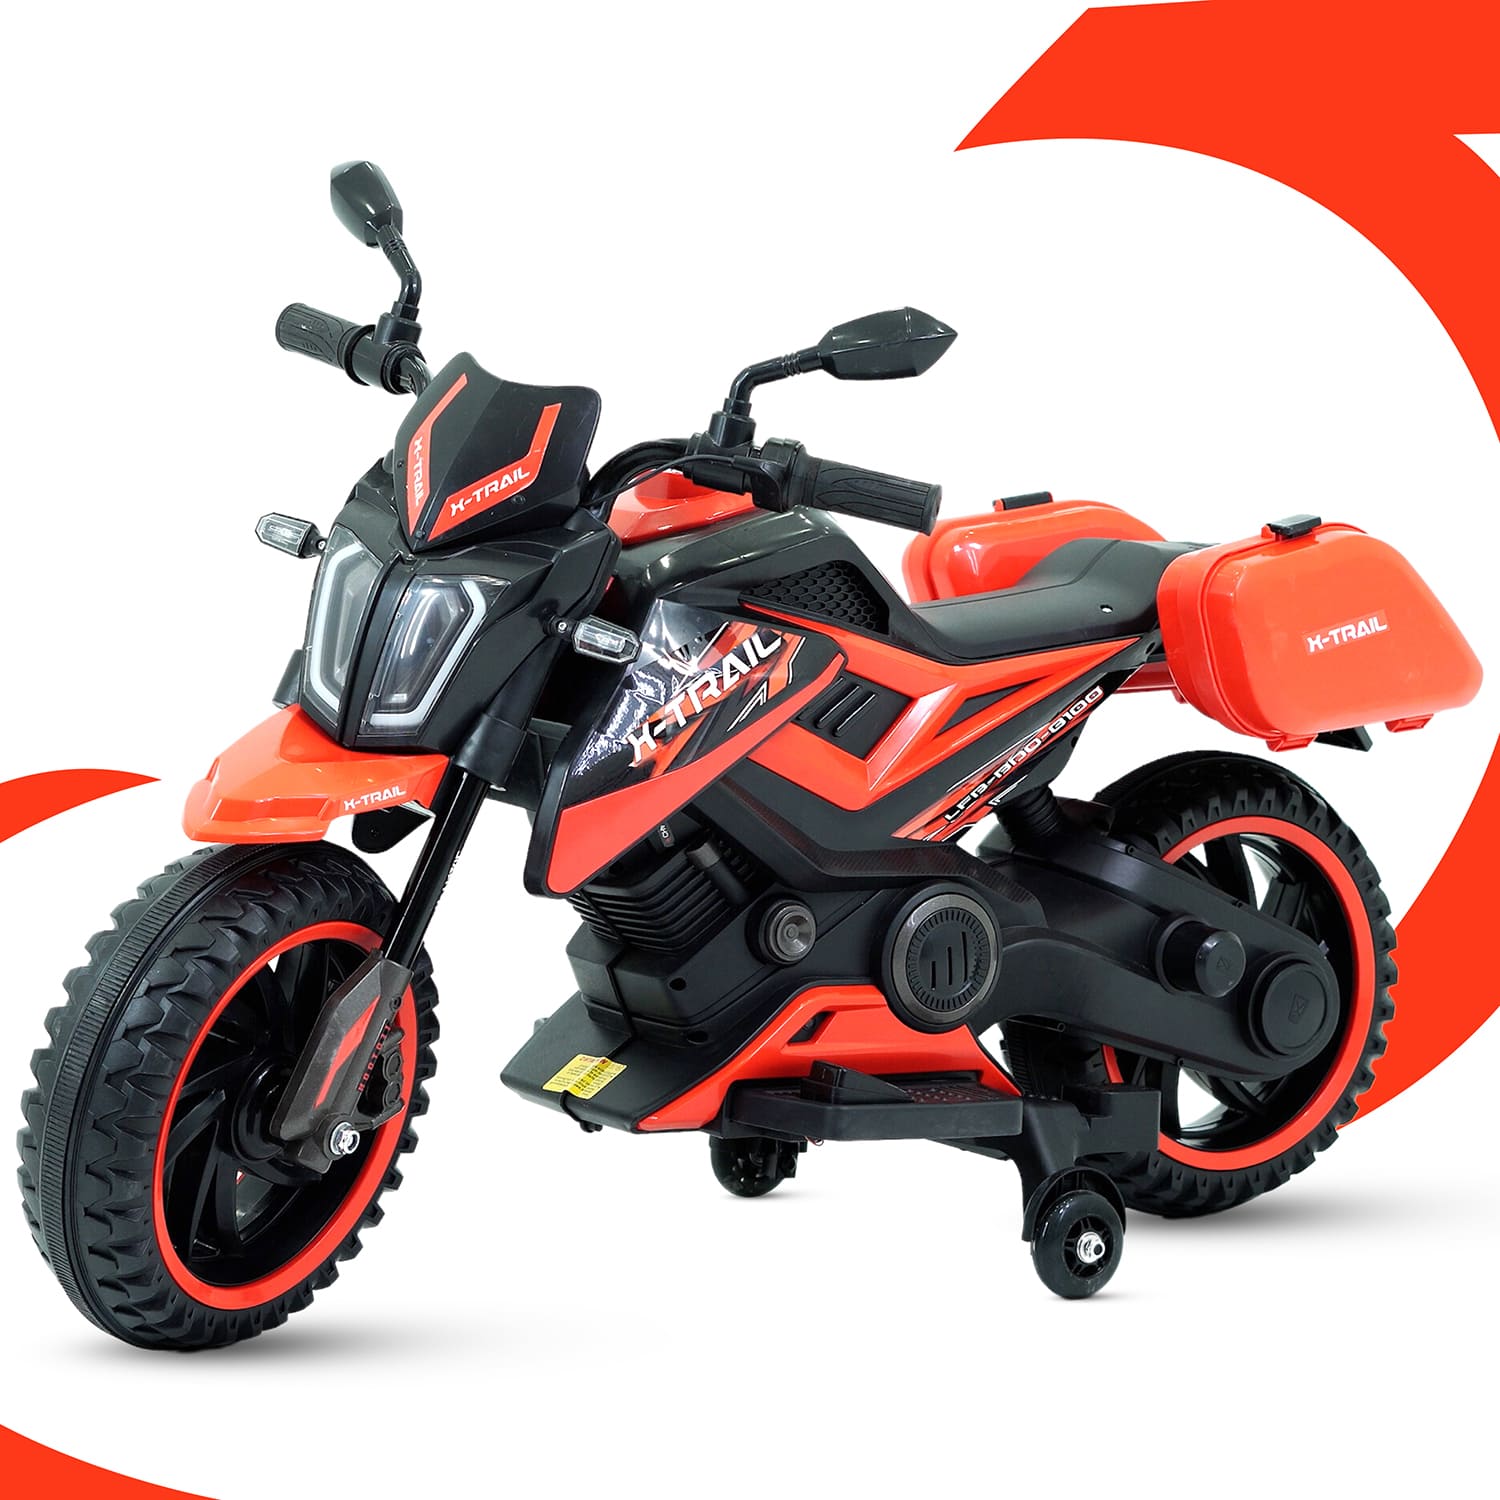 Electric Motor Bike Rechargeable Battery Operated Motorcycle -xtrail- Red